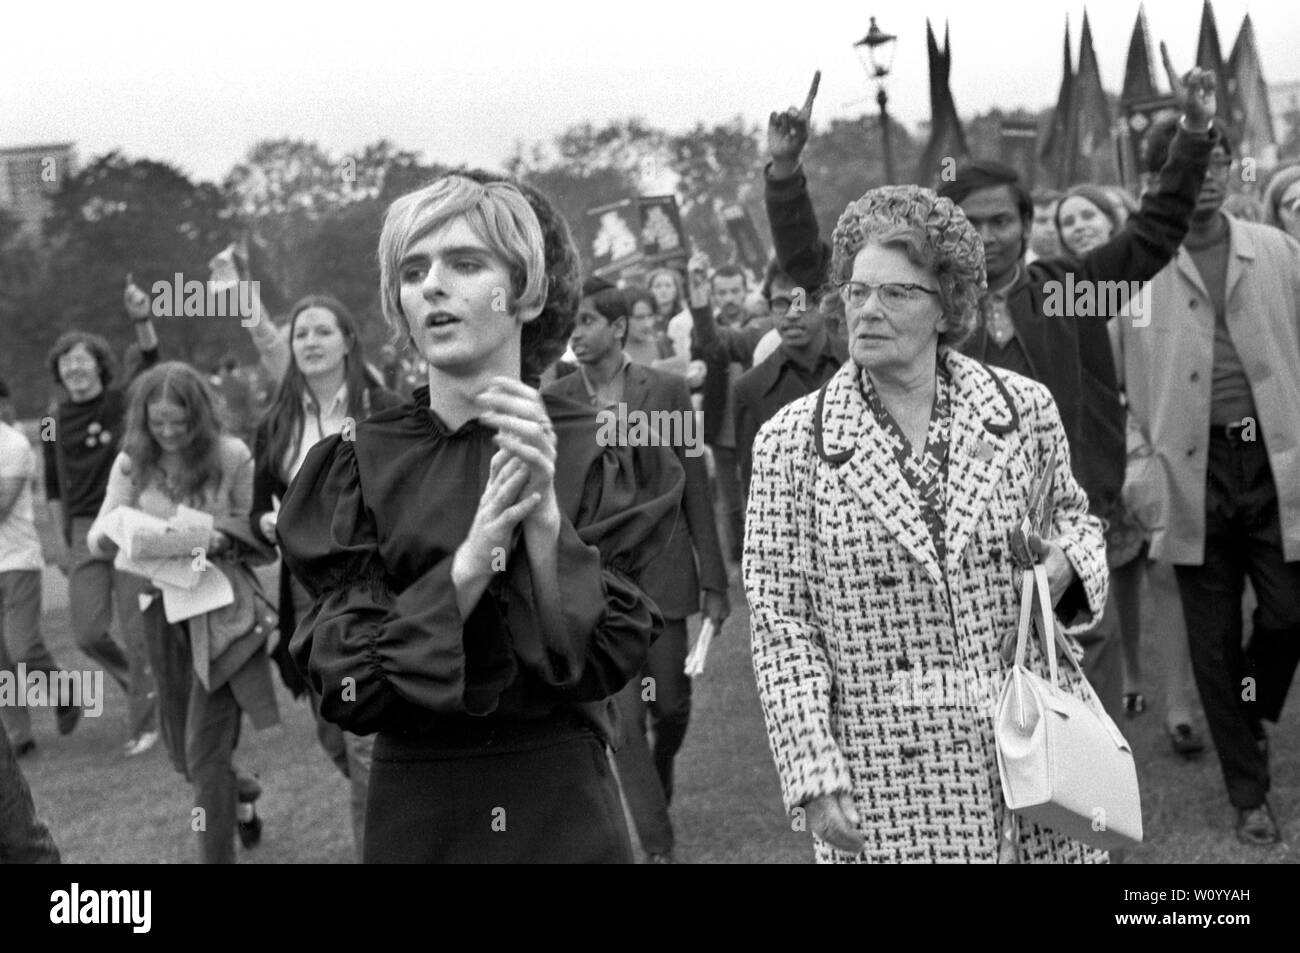 Gay Liberation Front - Gay Liberation Movement, man cross dressing demonstrated against the Nationwide Festival of Light, older woman angry with man dressed as a young woman Hyde Park London rally September 1971 LGBTQ 1970s UK HOMER SYKES Stock Photo